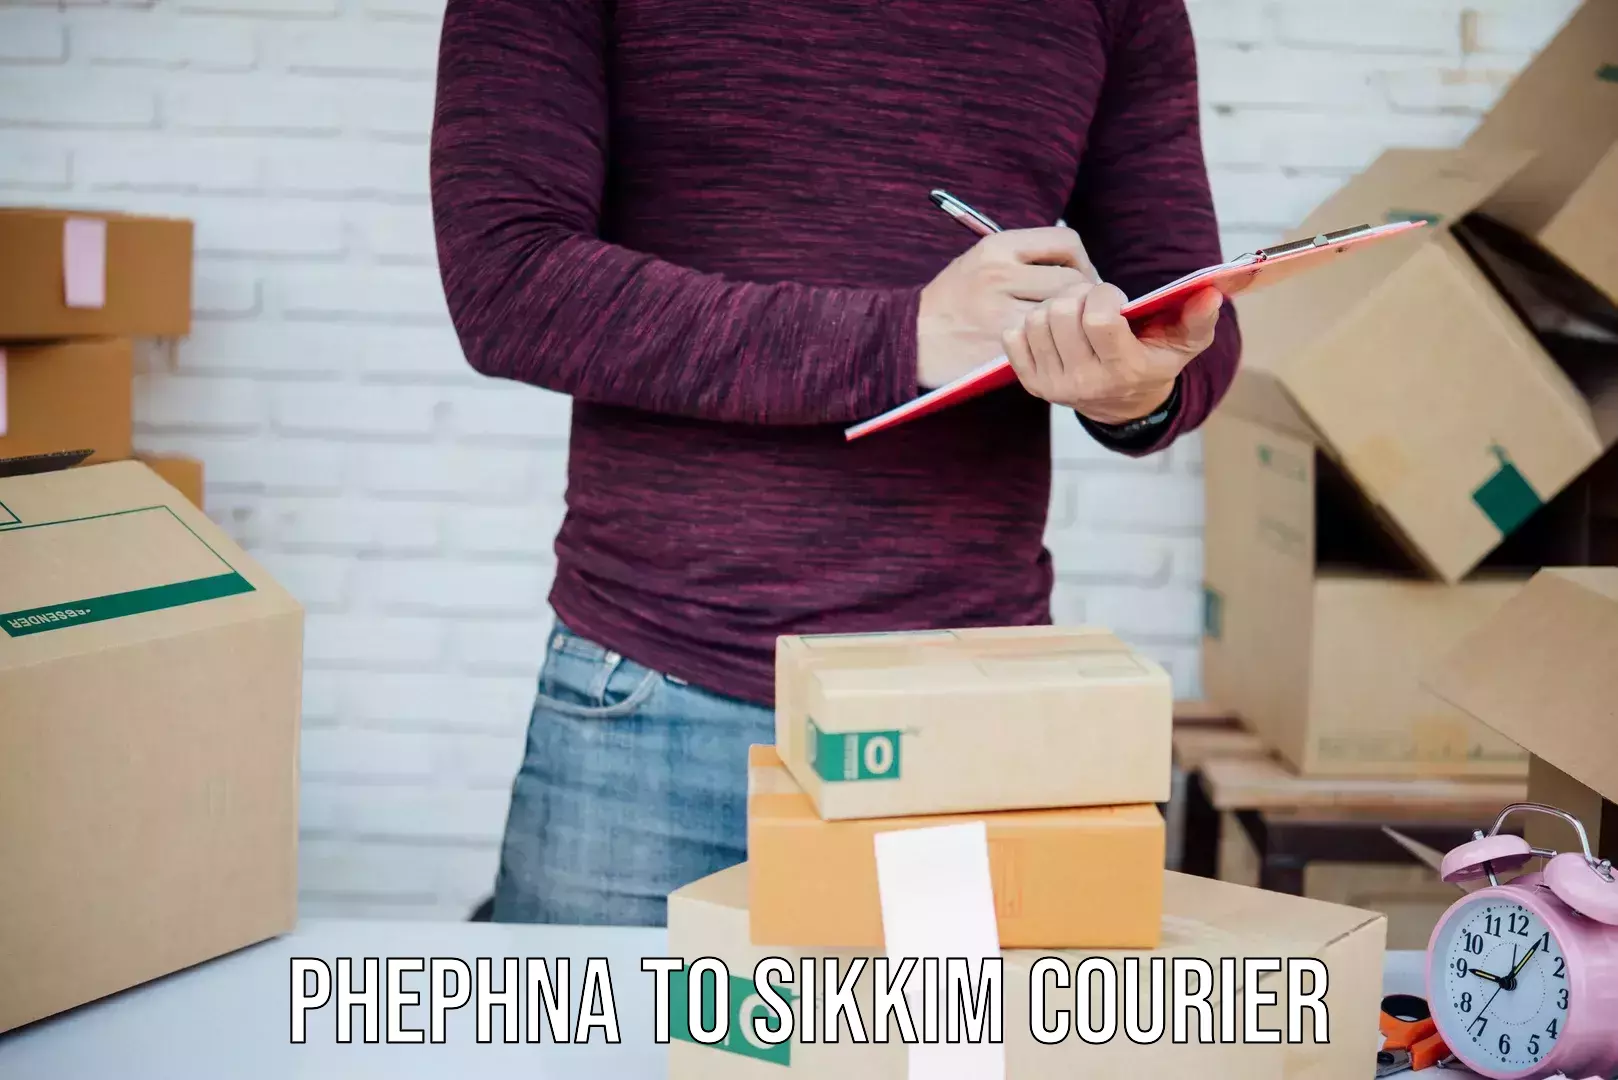 24/7 shipping services Phephna to Pelling